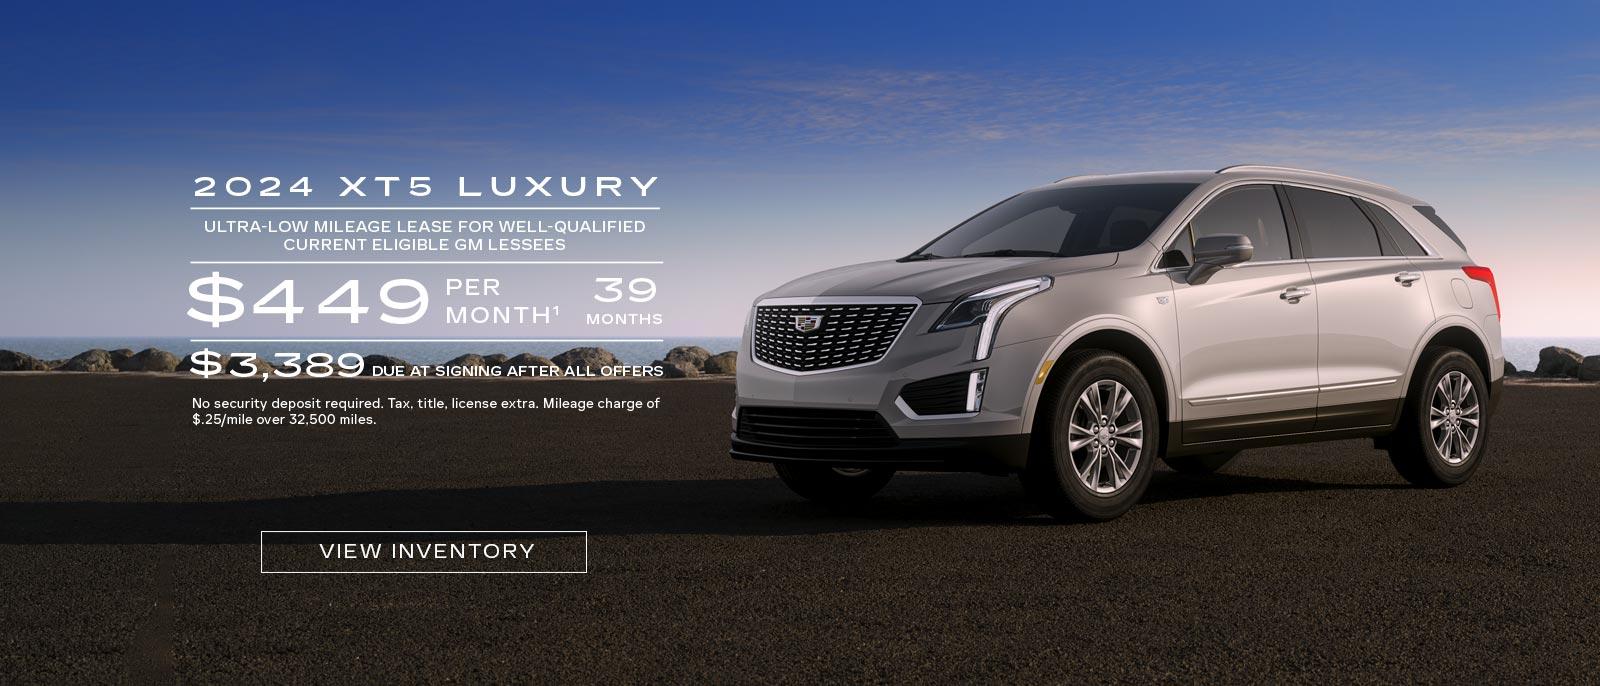 2024 XT5 Luxury. Ultra-low mileage lease for well-qualified current eligible GM Lessees. $449 per month. 39 months. $3,389 due at signing after all offers.